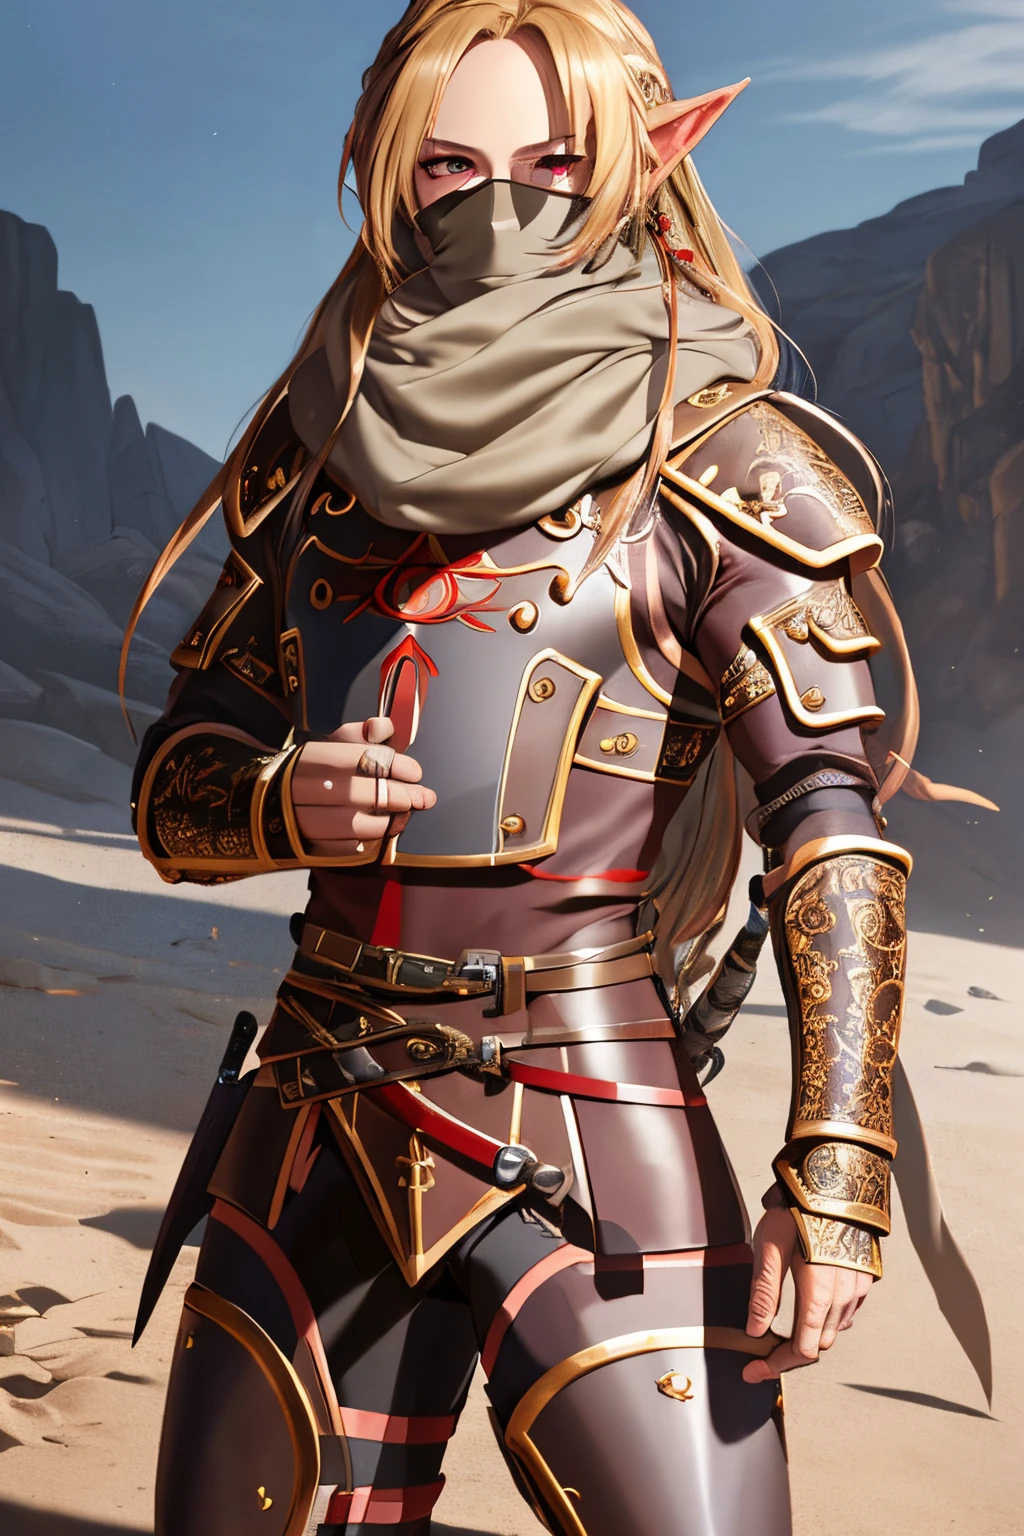 16k, HD, Professional, Highly Detailed, ((Masterpiece: 0.3)), (((High Quality))), Ultra-detailed face, Highly Detailed Lips, Detailed Eyes, full body, 1 male, wrapped in linen, eyes, leather armor, wielding rifle, tan colored armor and wraps, face covered by dragon mask, pointed ears, (brown clothing), red scales around eyes, mask, desert